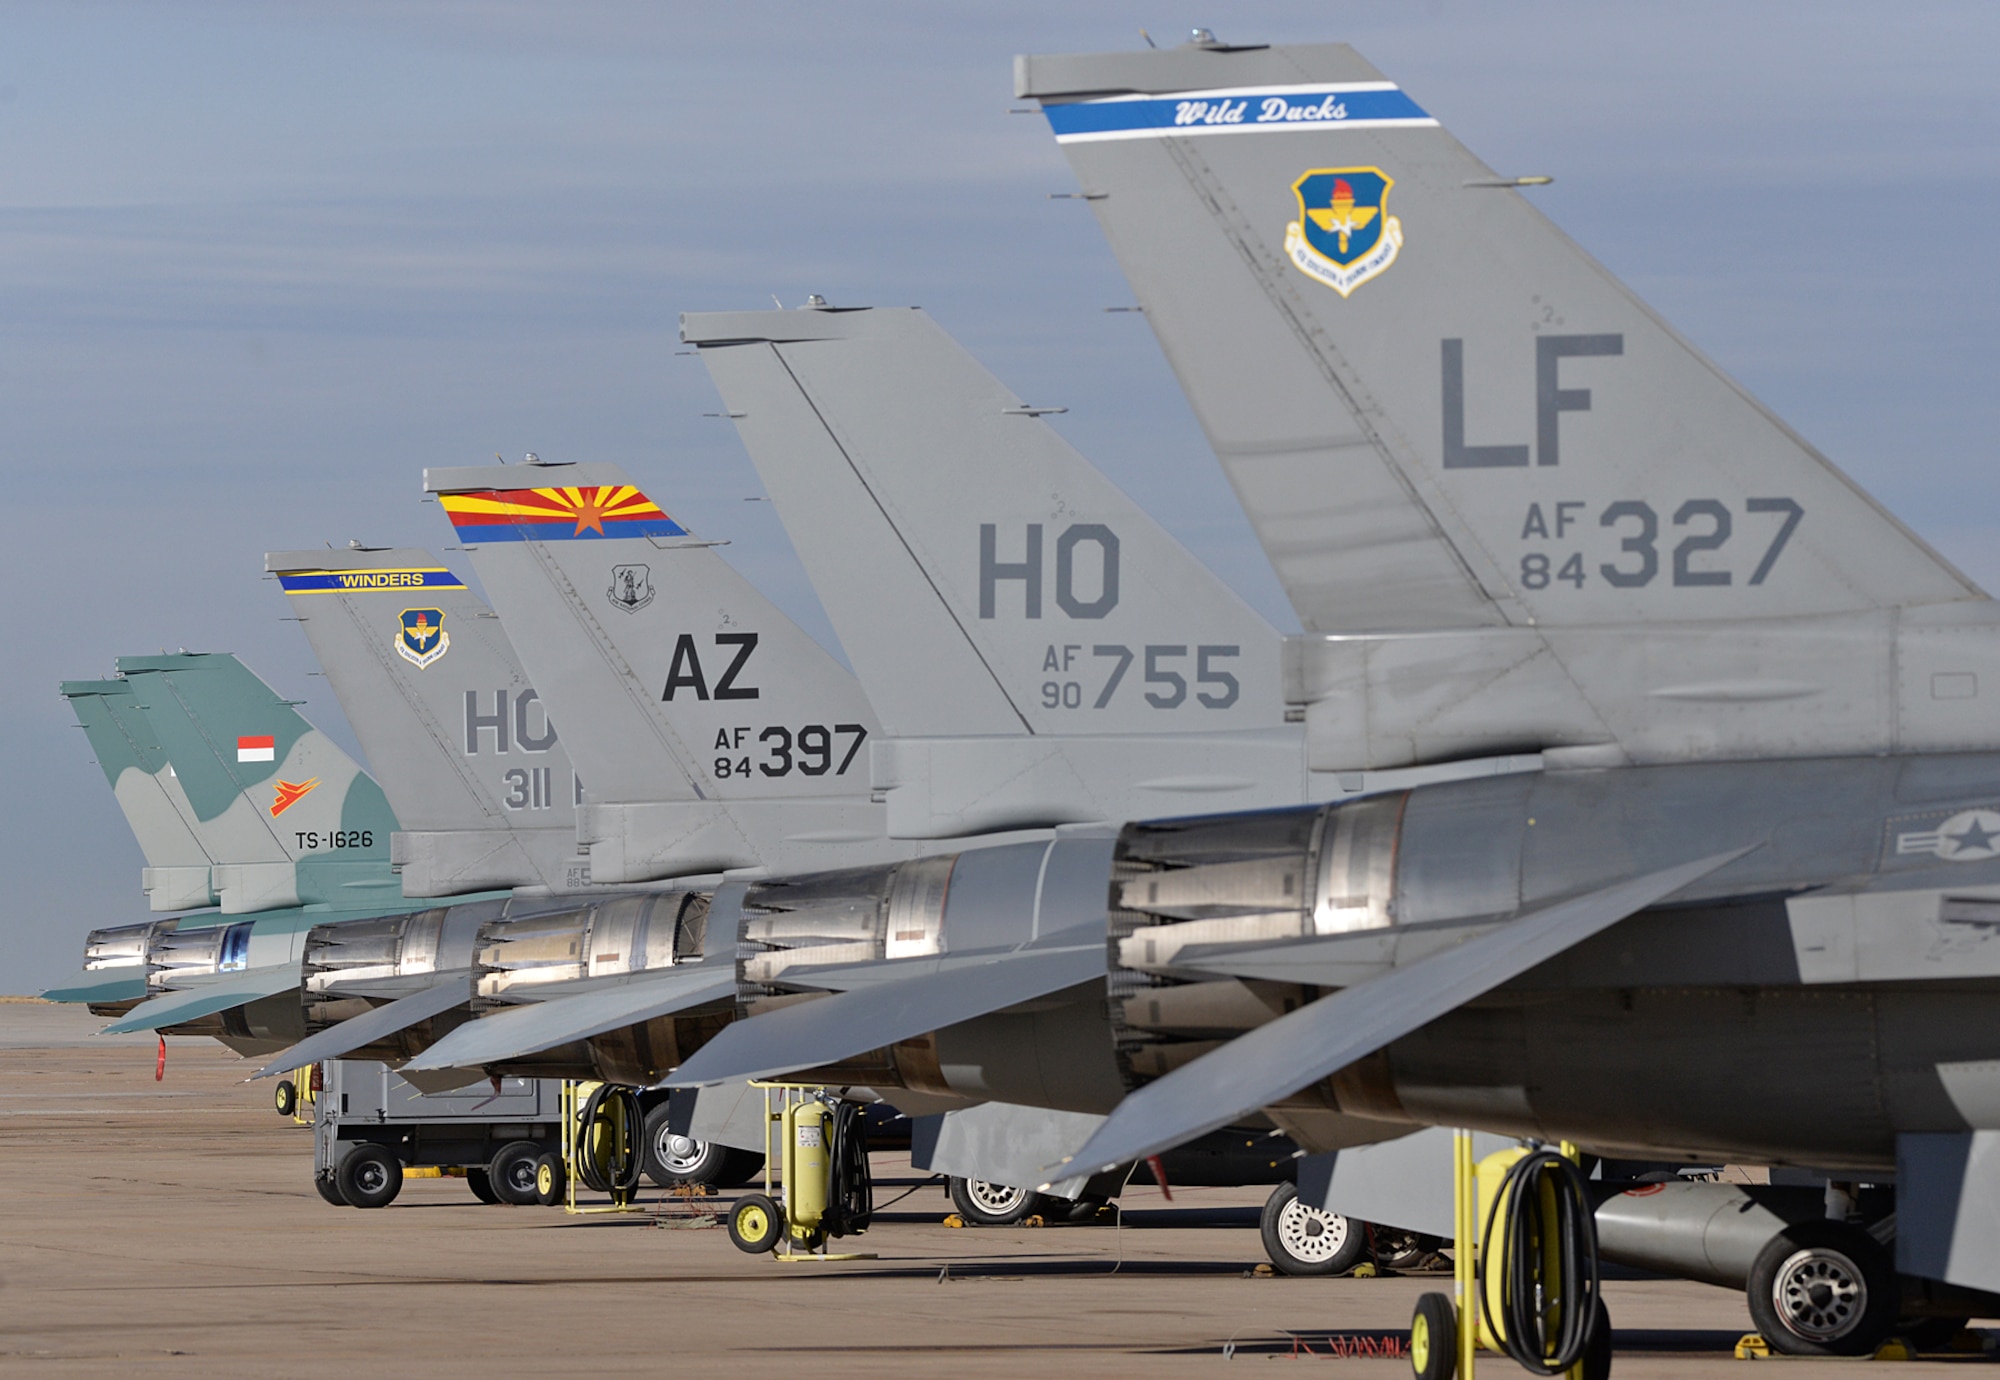 Six F-16 Fighting Falcons sit on the 514th Flight Test Squadron ramp at Hill Air Force Base, Utah, on Nov. 15, 2017. The aircraft are awaiting test flight or to be returned to their assigned units after completion of depot maintenance. (U.S. Air Force photo by Alex R. Lloyd)